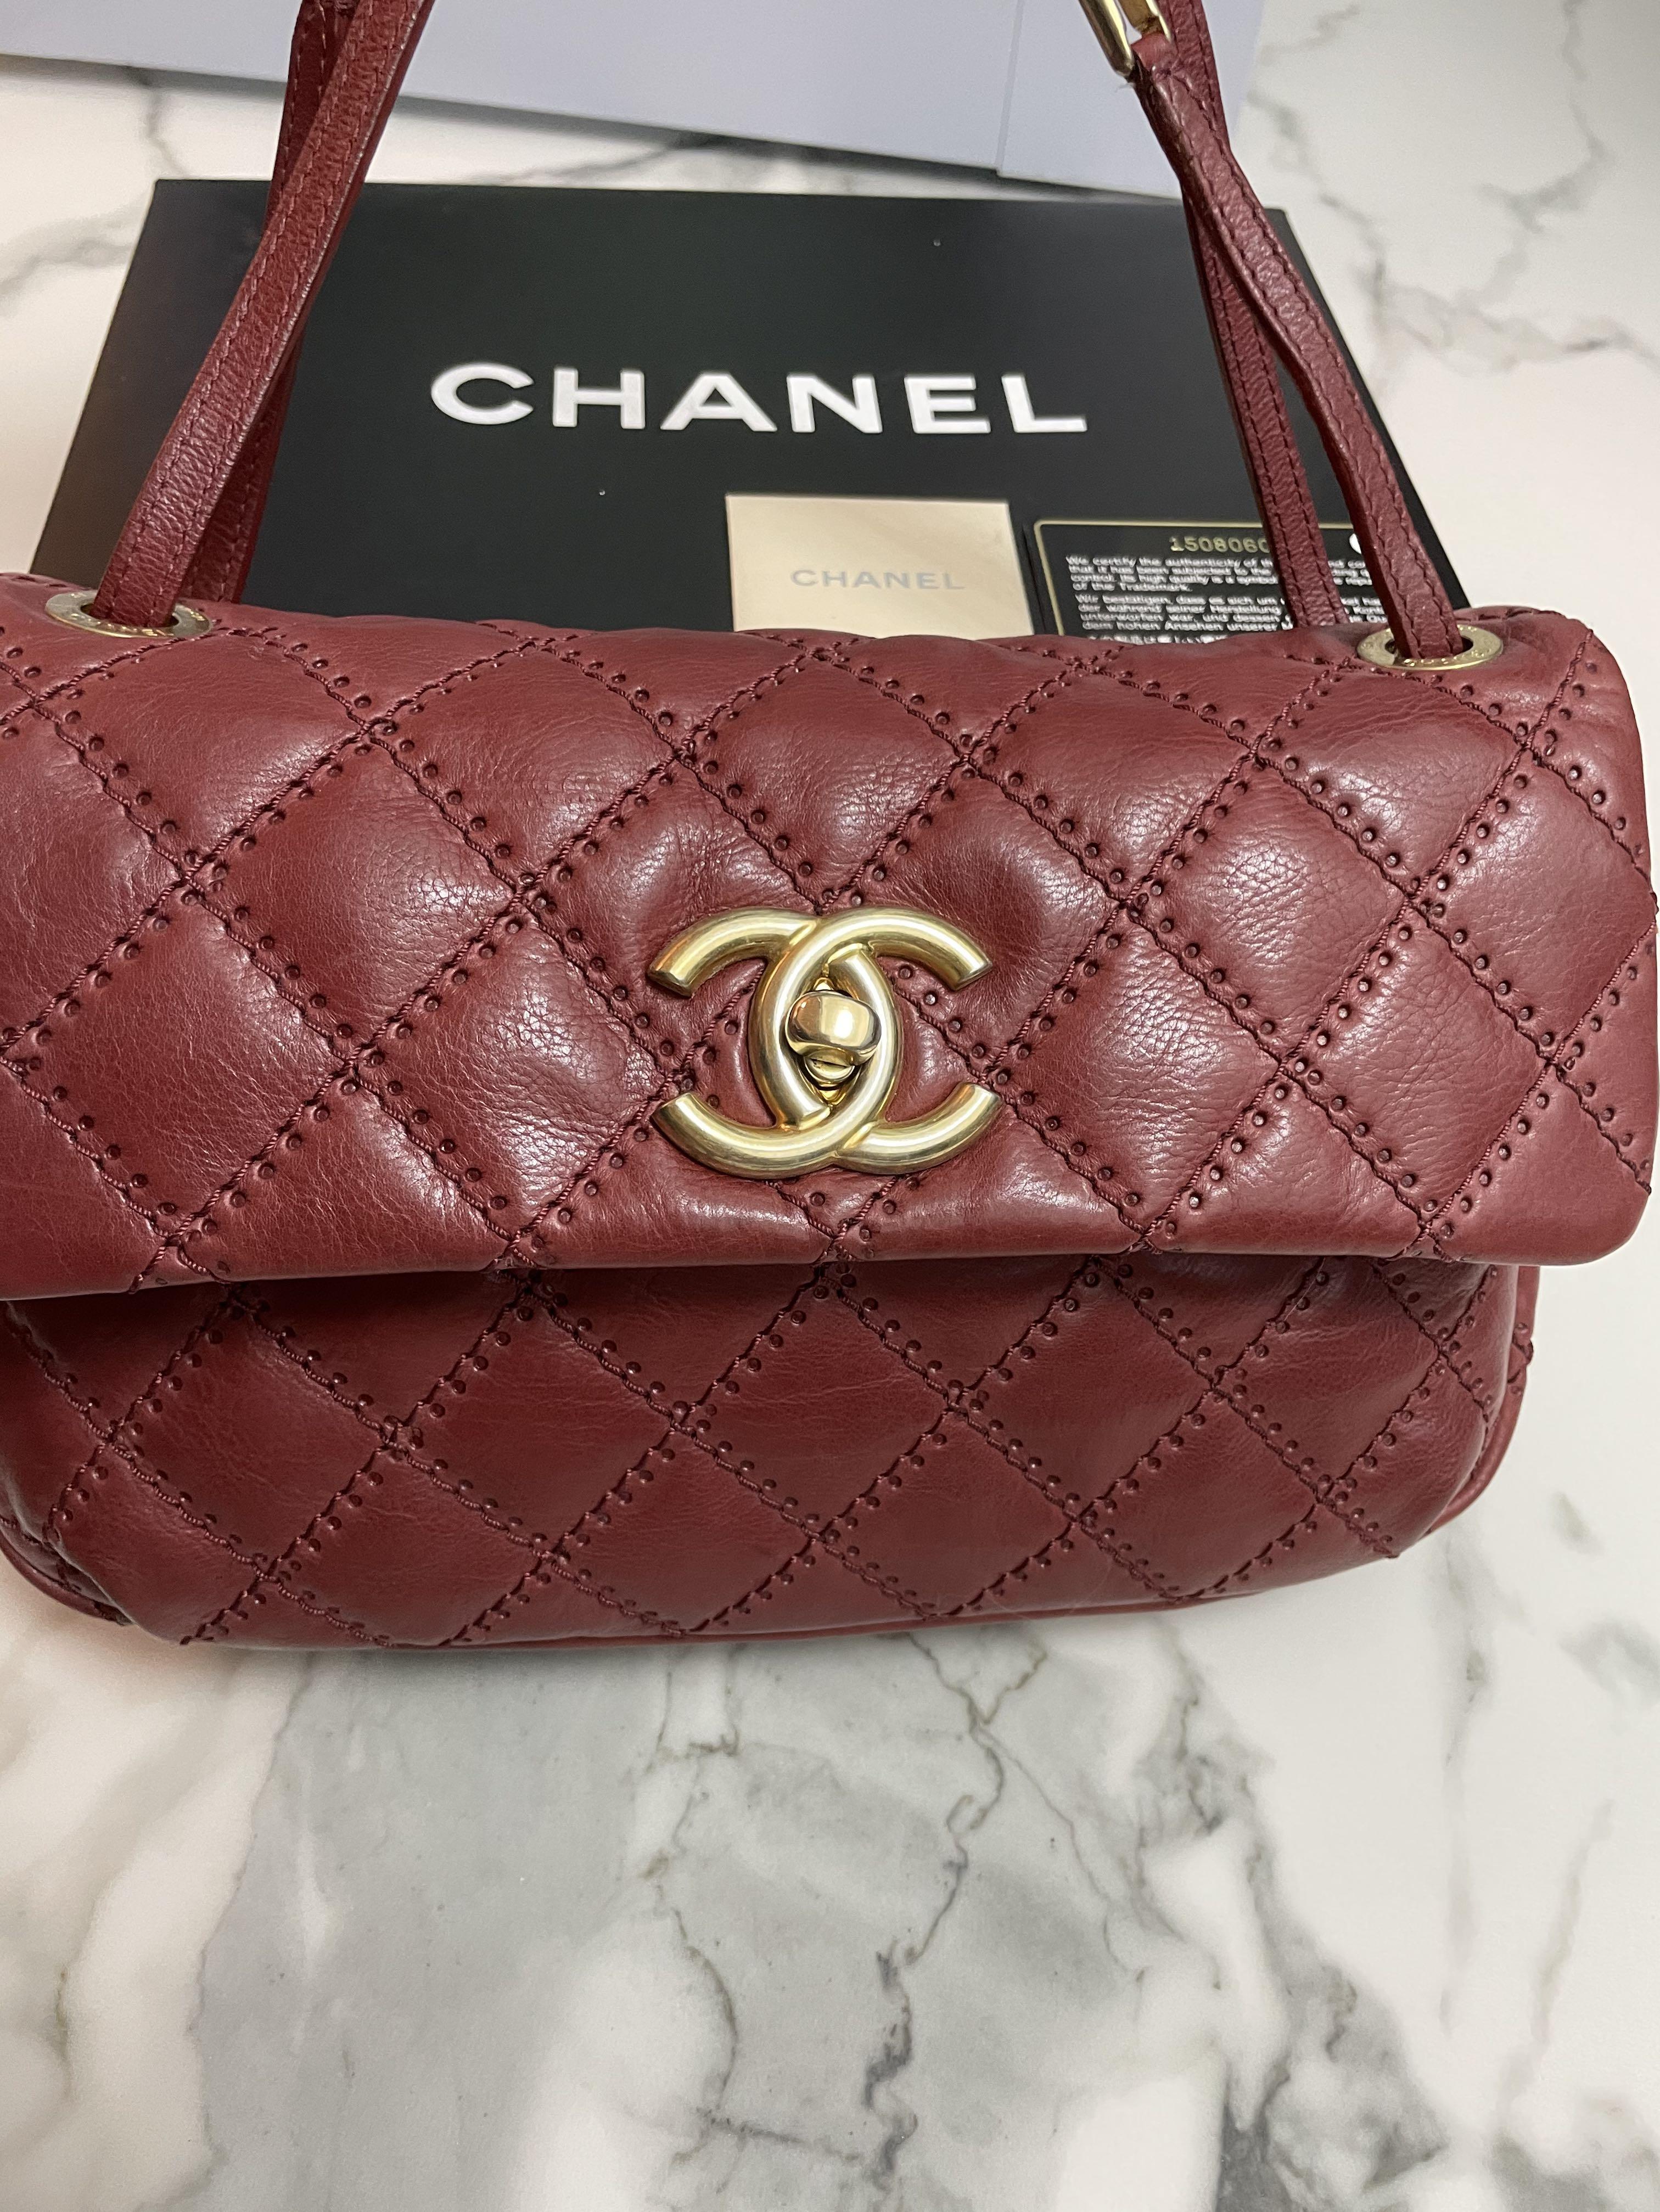 CHANEL Calfskin Stitched Small Flap Bag Black 801386